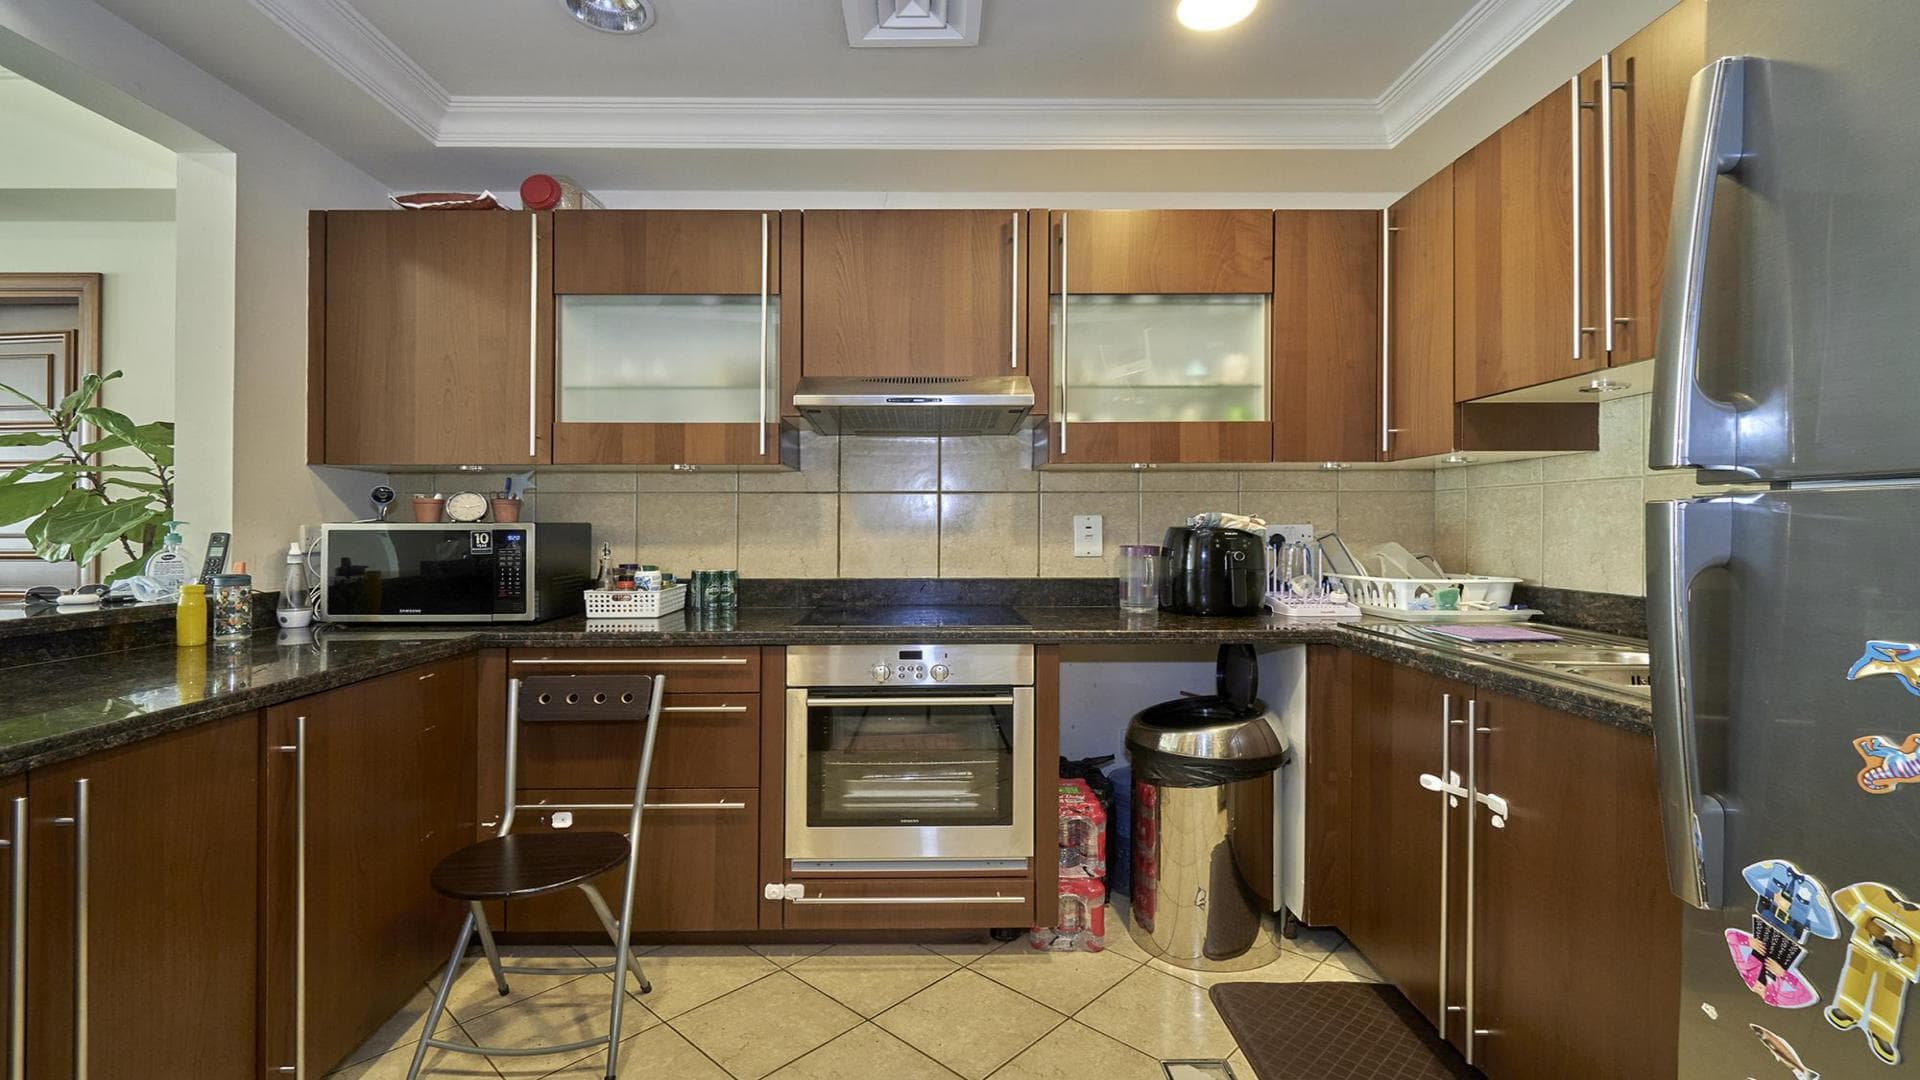 2 Bedroom Apartment For Sale Boulevard Plaza 1 Lp25976 2733829a2f904000.jpg